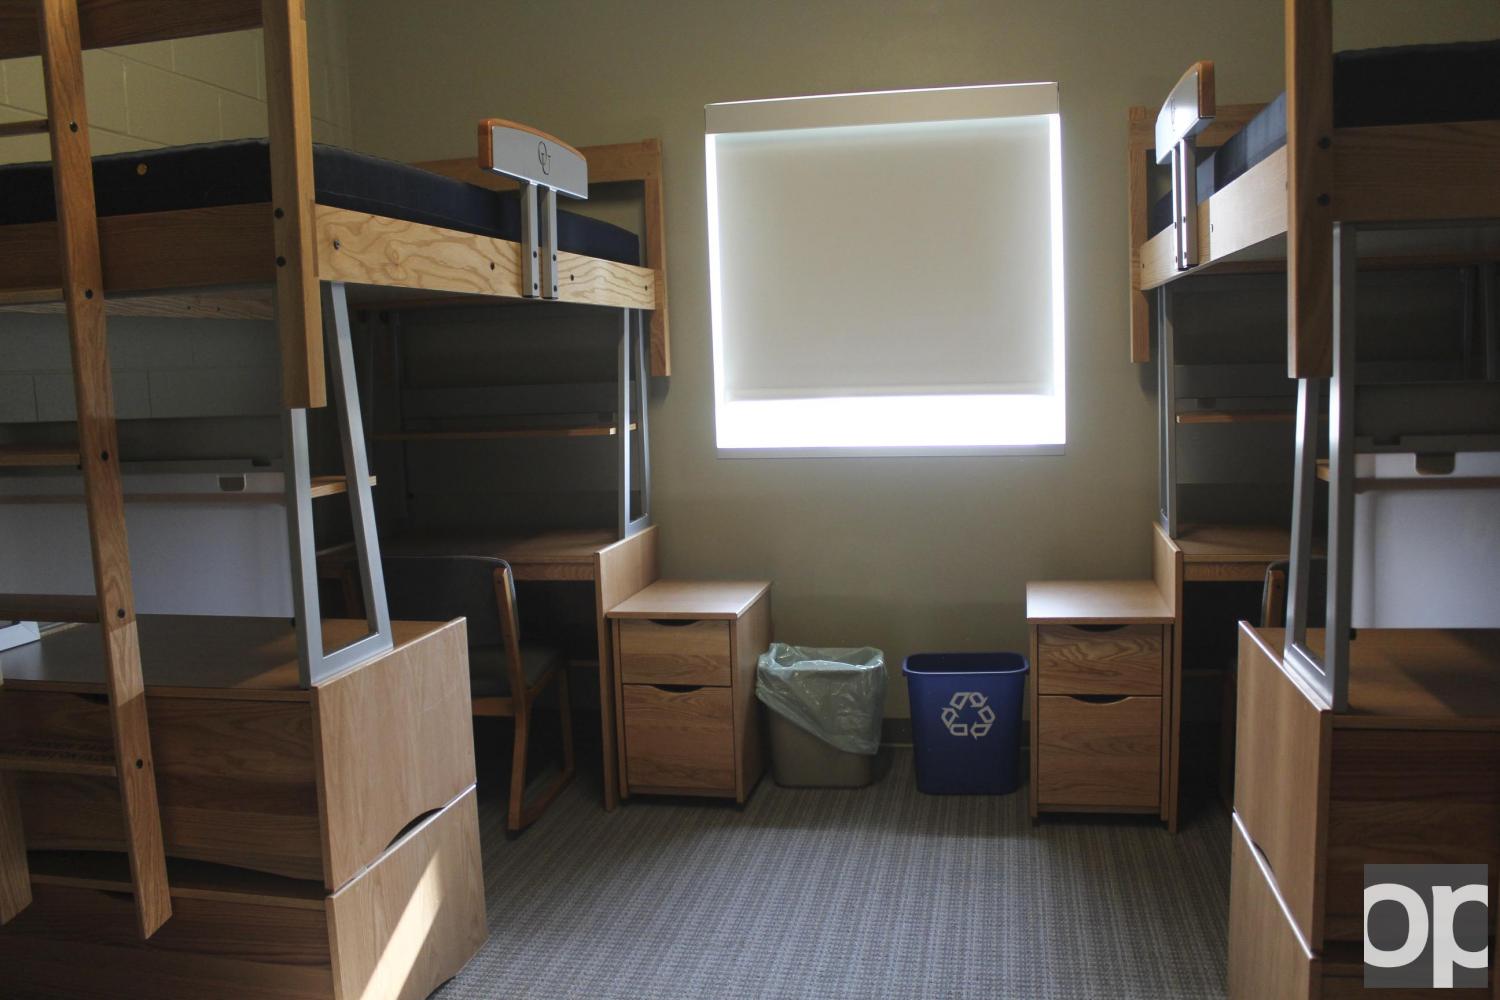 This Oakview room is spotless and ready for move-in.